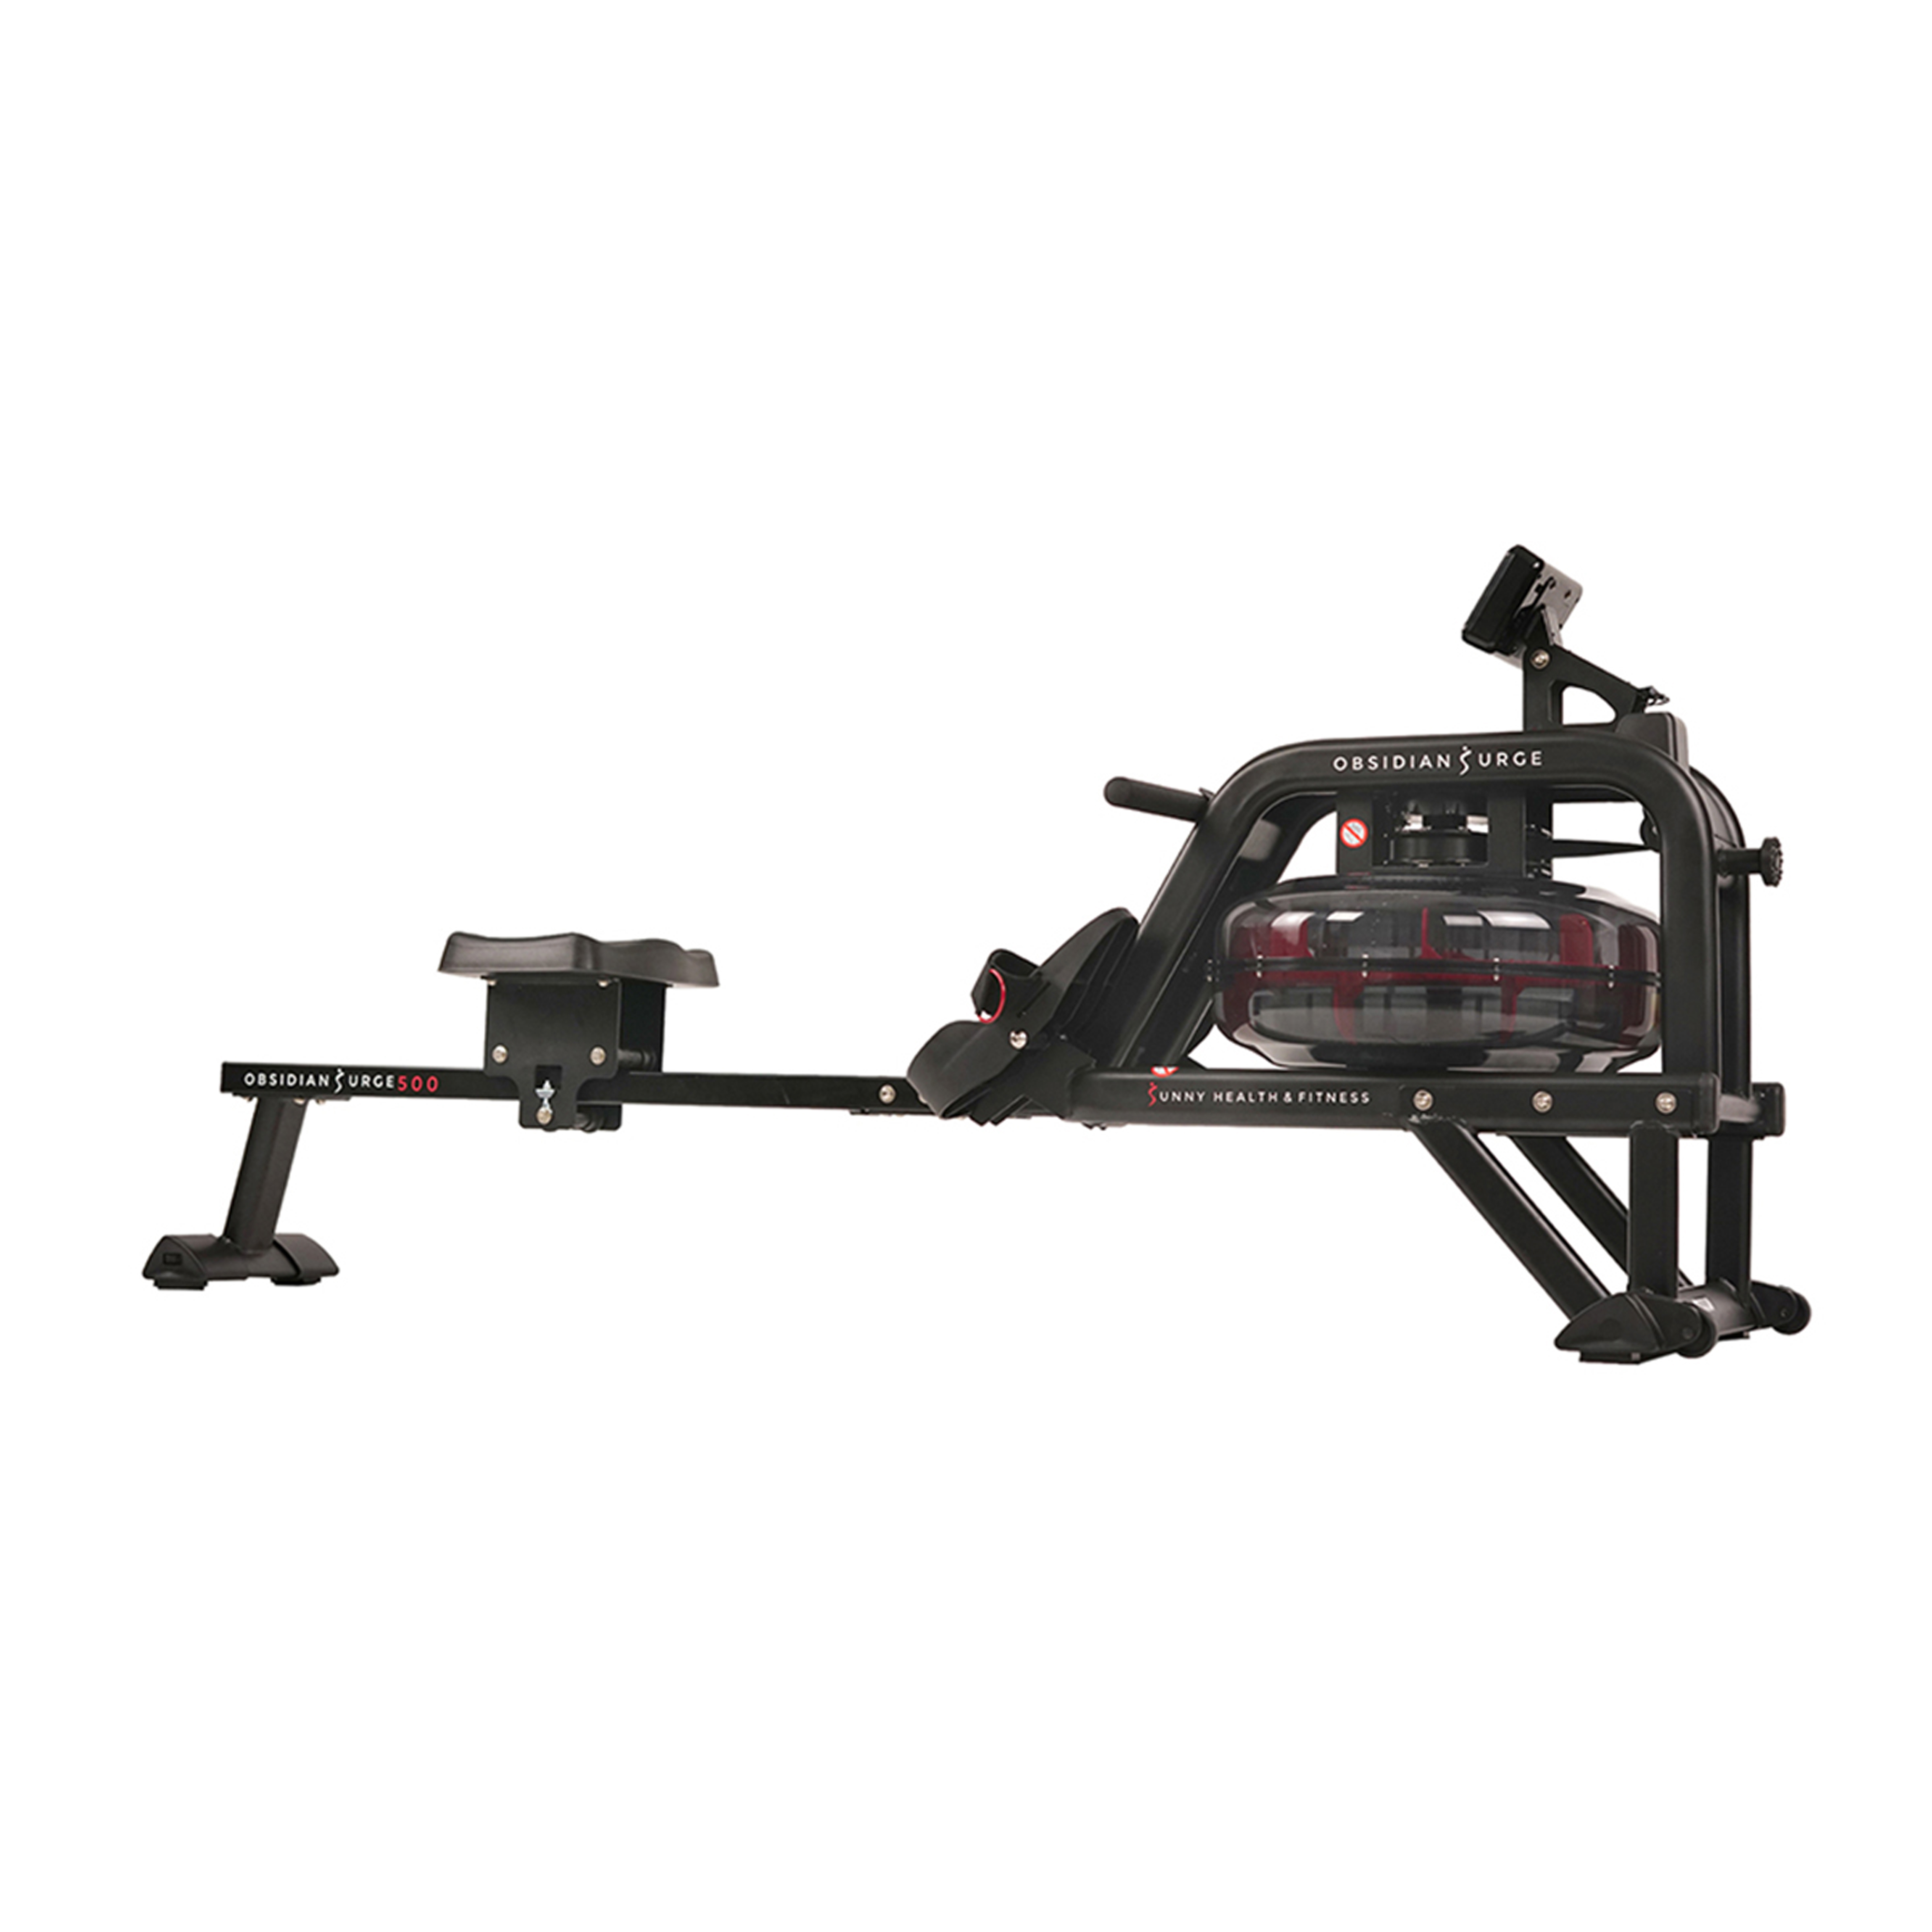 Sunny Health & Fitness Water Rowing Machine Rower w/LCD Monitor - Obsidian SF-RW5713 - image 1 of 7